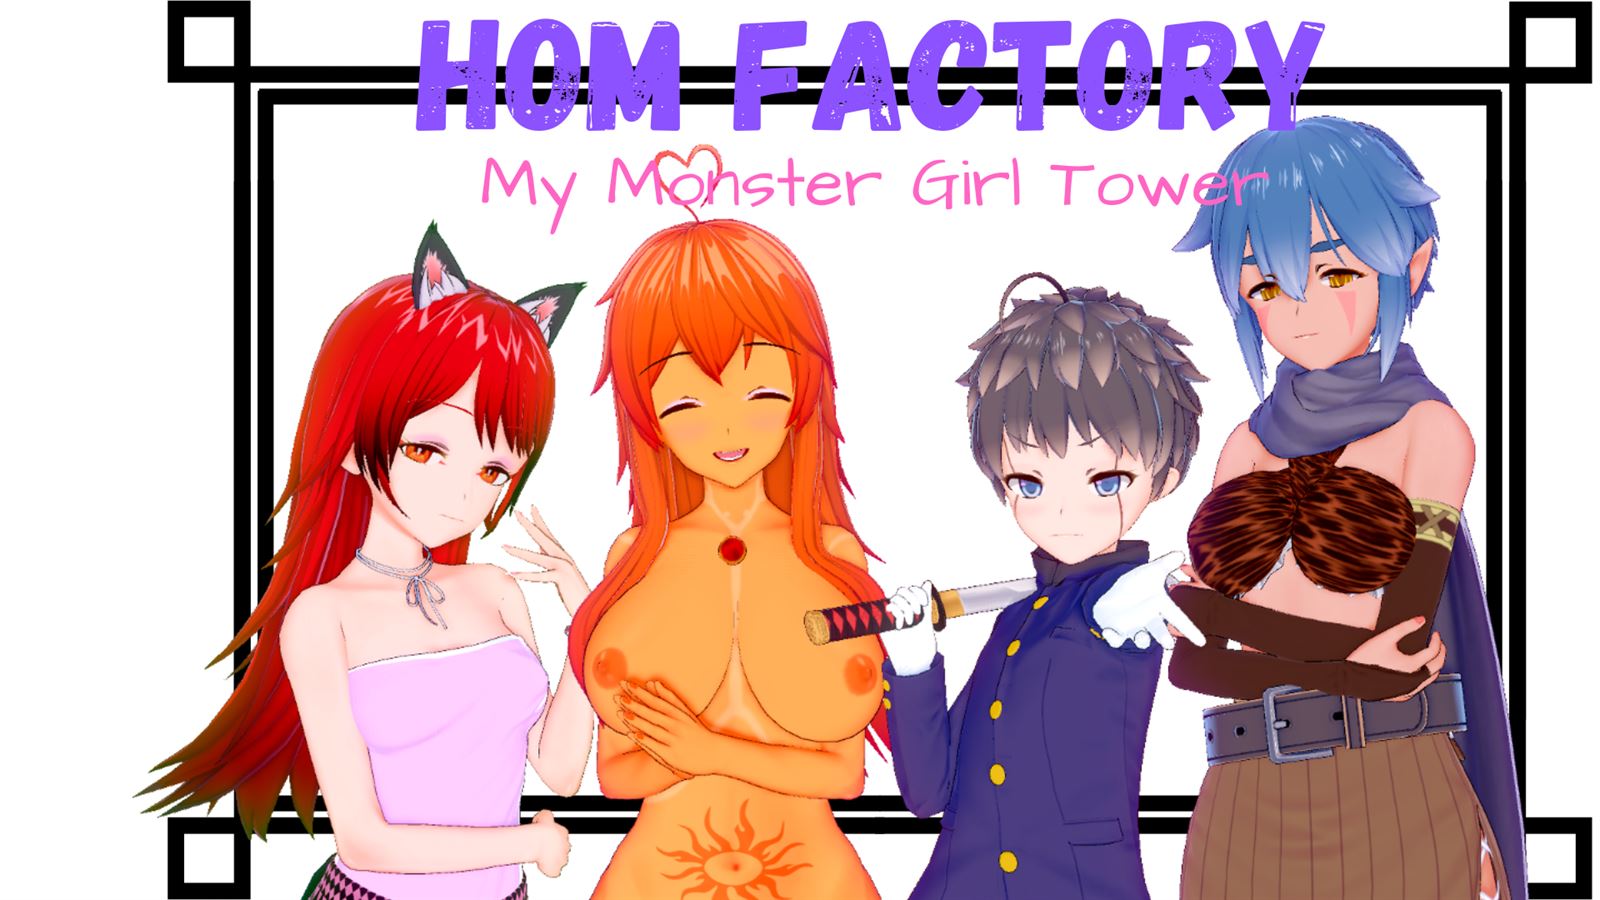 Hom Sex - Hom Factory: My Monster Girl Tower Ren'py Porn Sex Game v.3.0.1 Download  for Windows, MacOS, Linux, Android